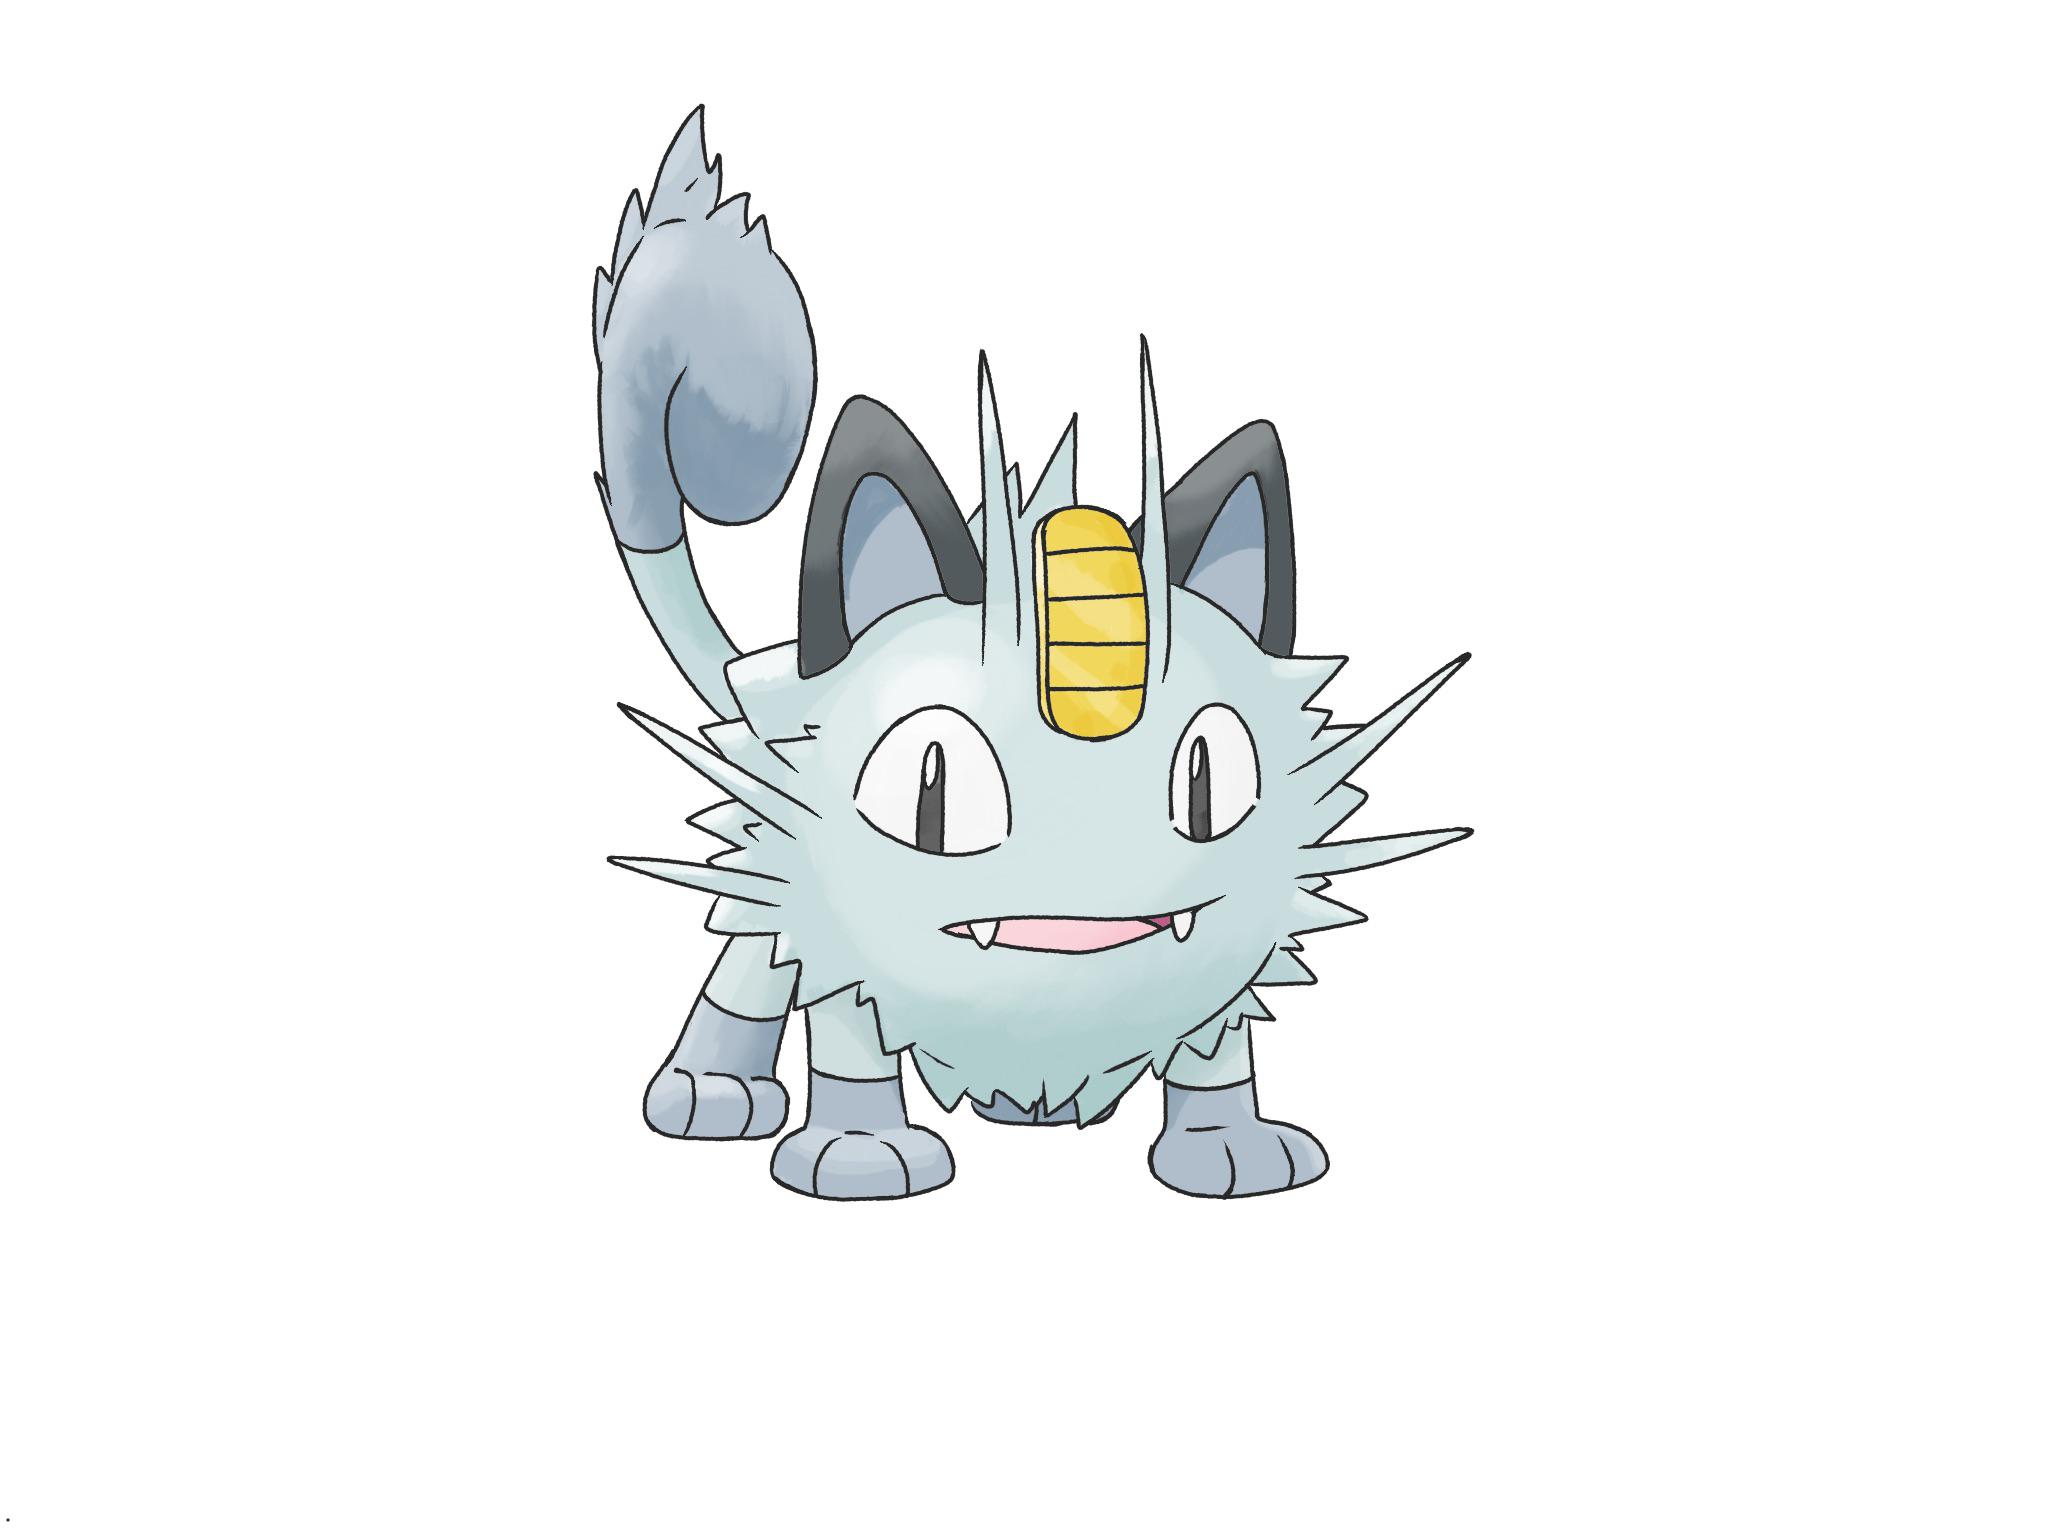 So I did a drawing of the supposedly leaked Galarian Meowth who's